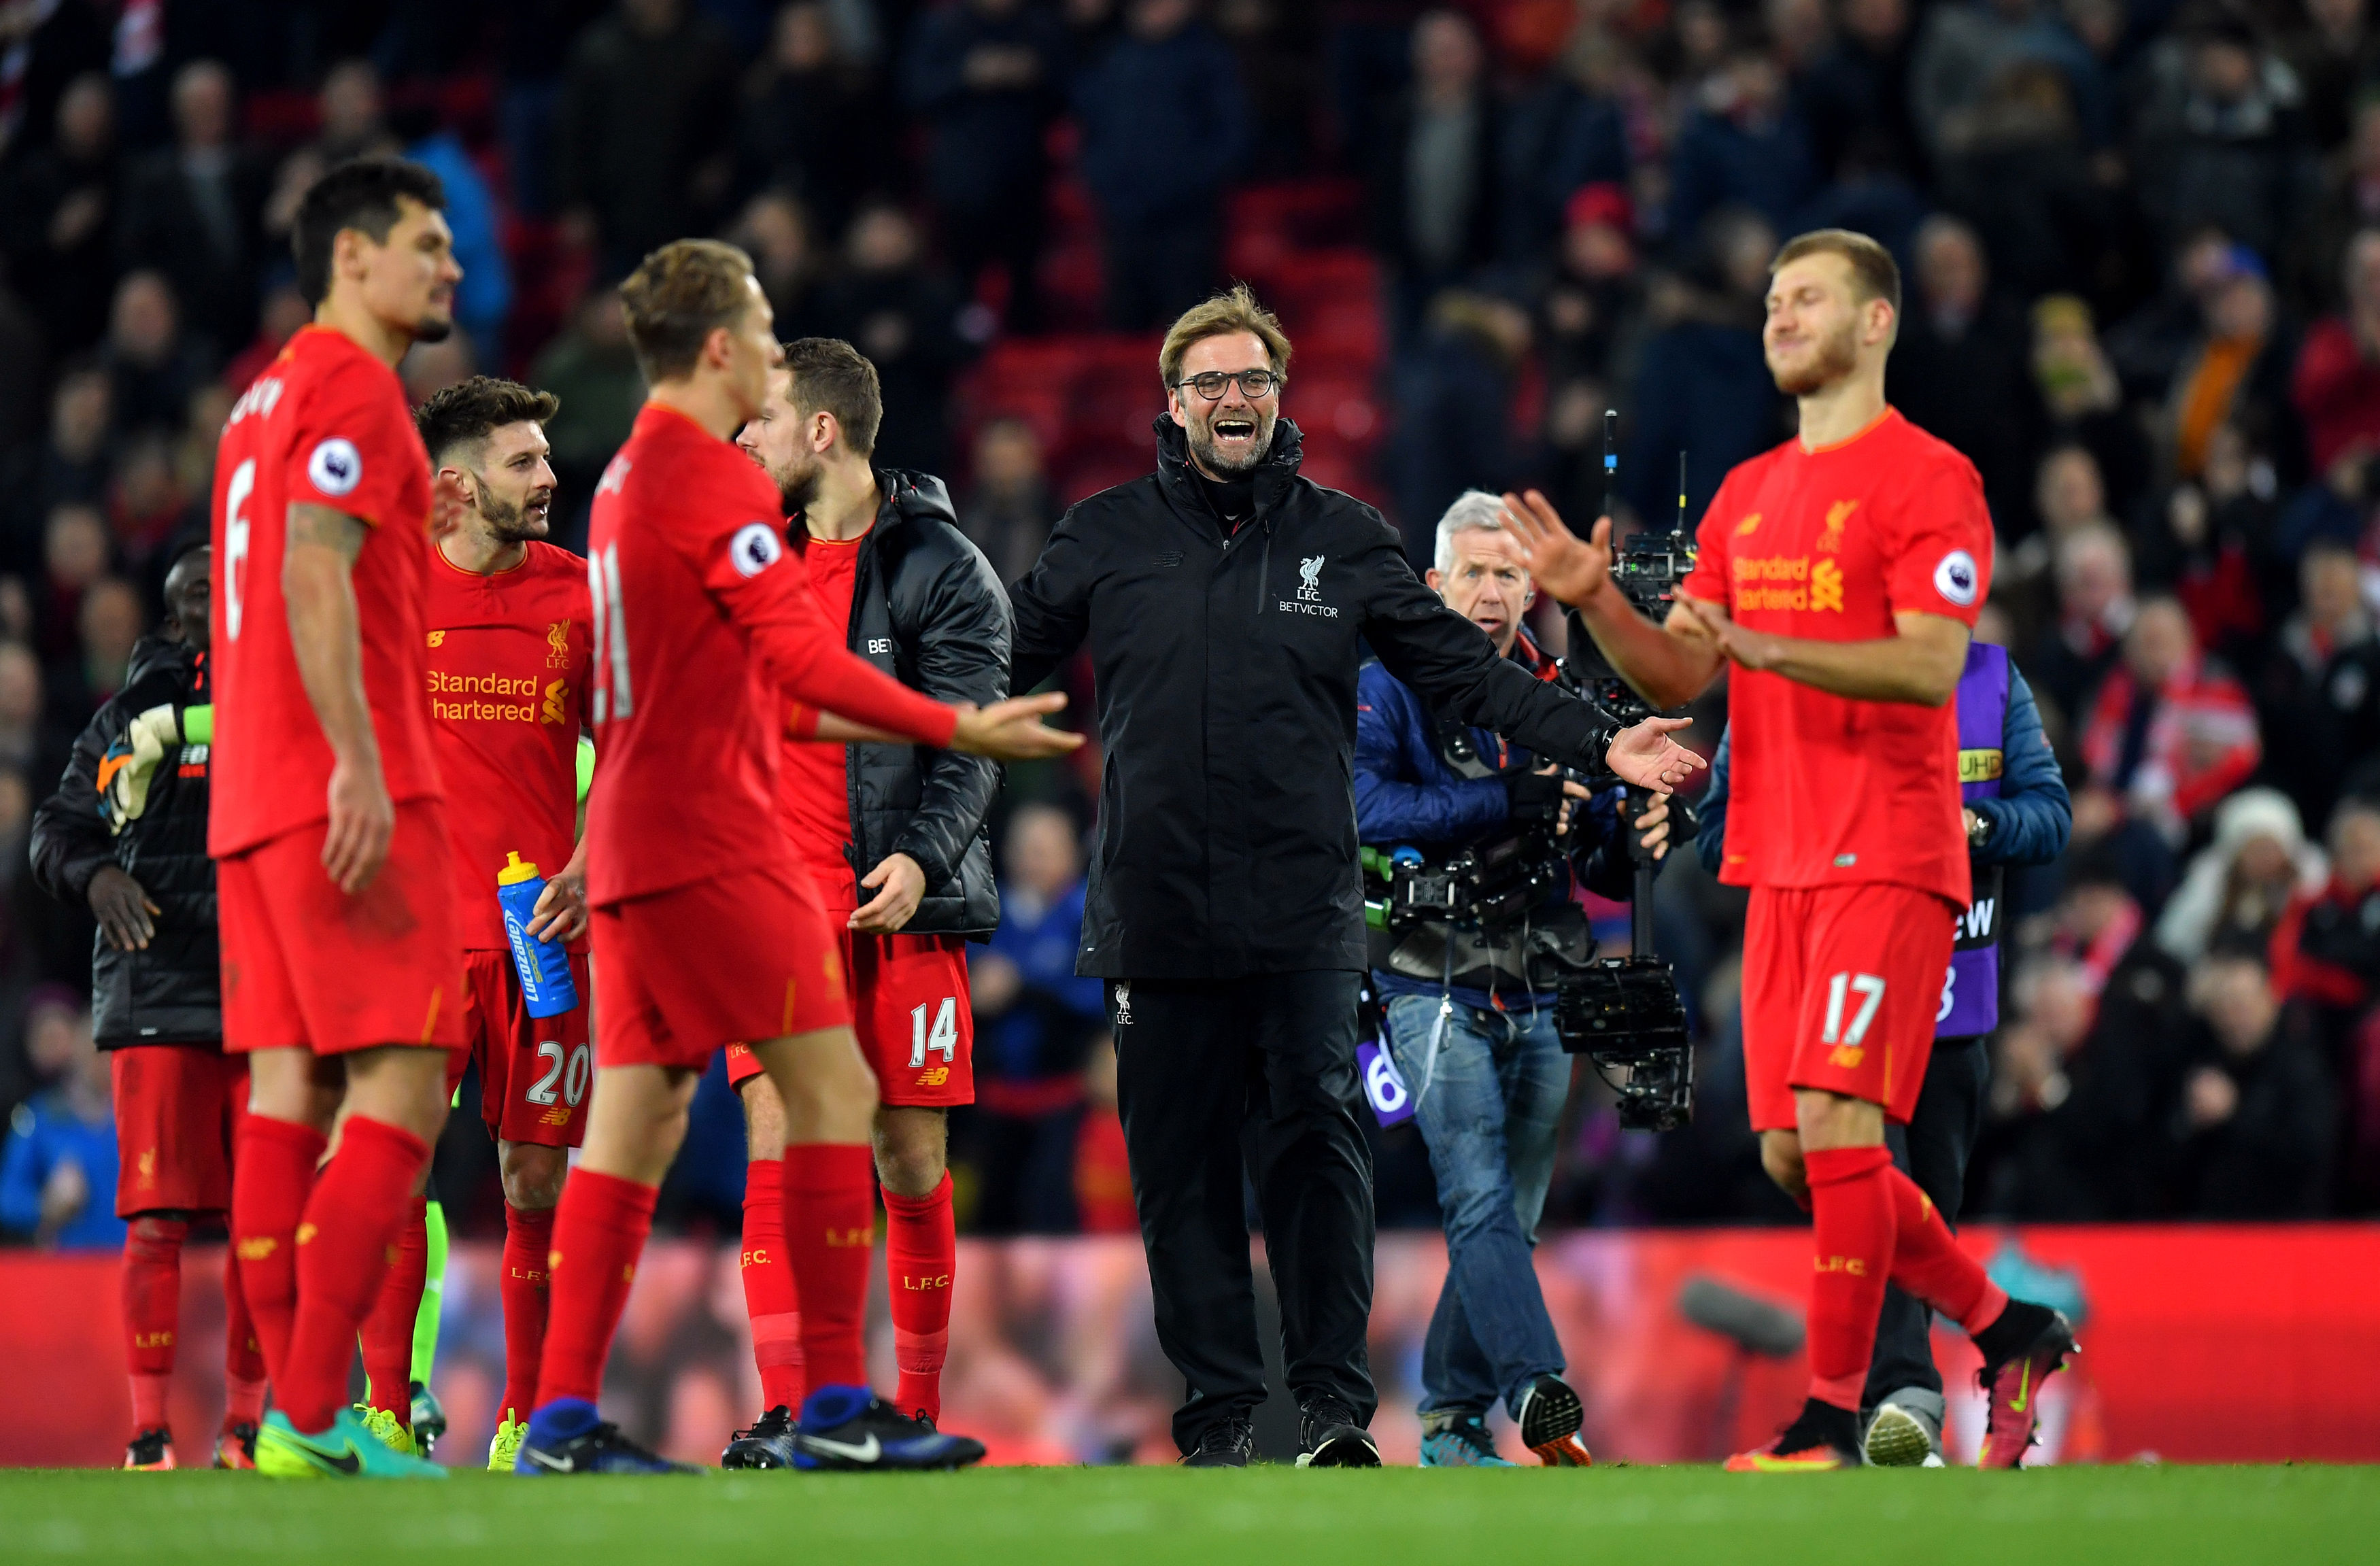 Liverpool manager Jurgen Klopp, center, celebrates with his players after the English Premier League soccer match Liverpool against Manchester City at Anfield, Liverpool, England, Saturday, Dec. 31, 2016. AP